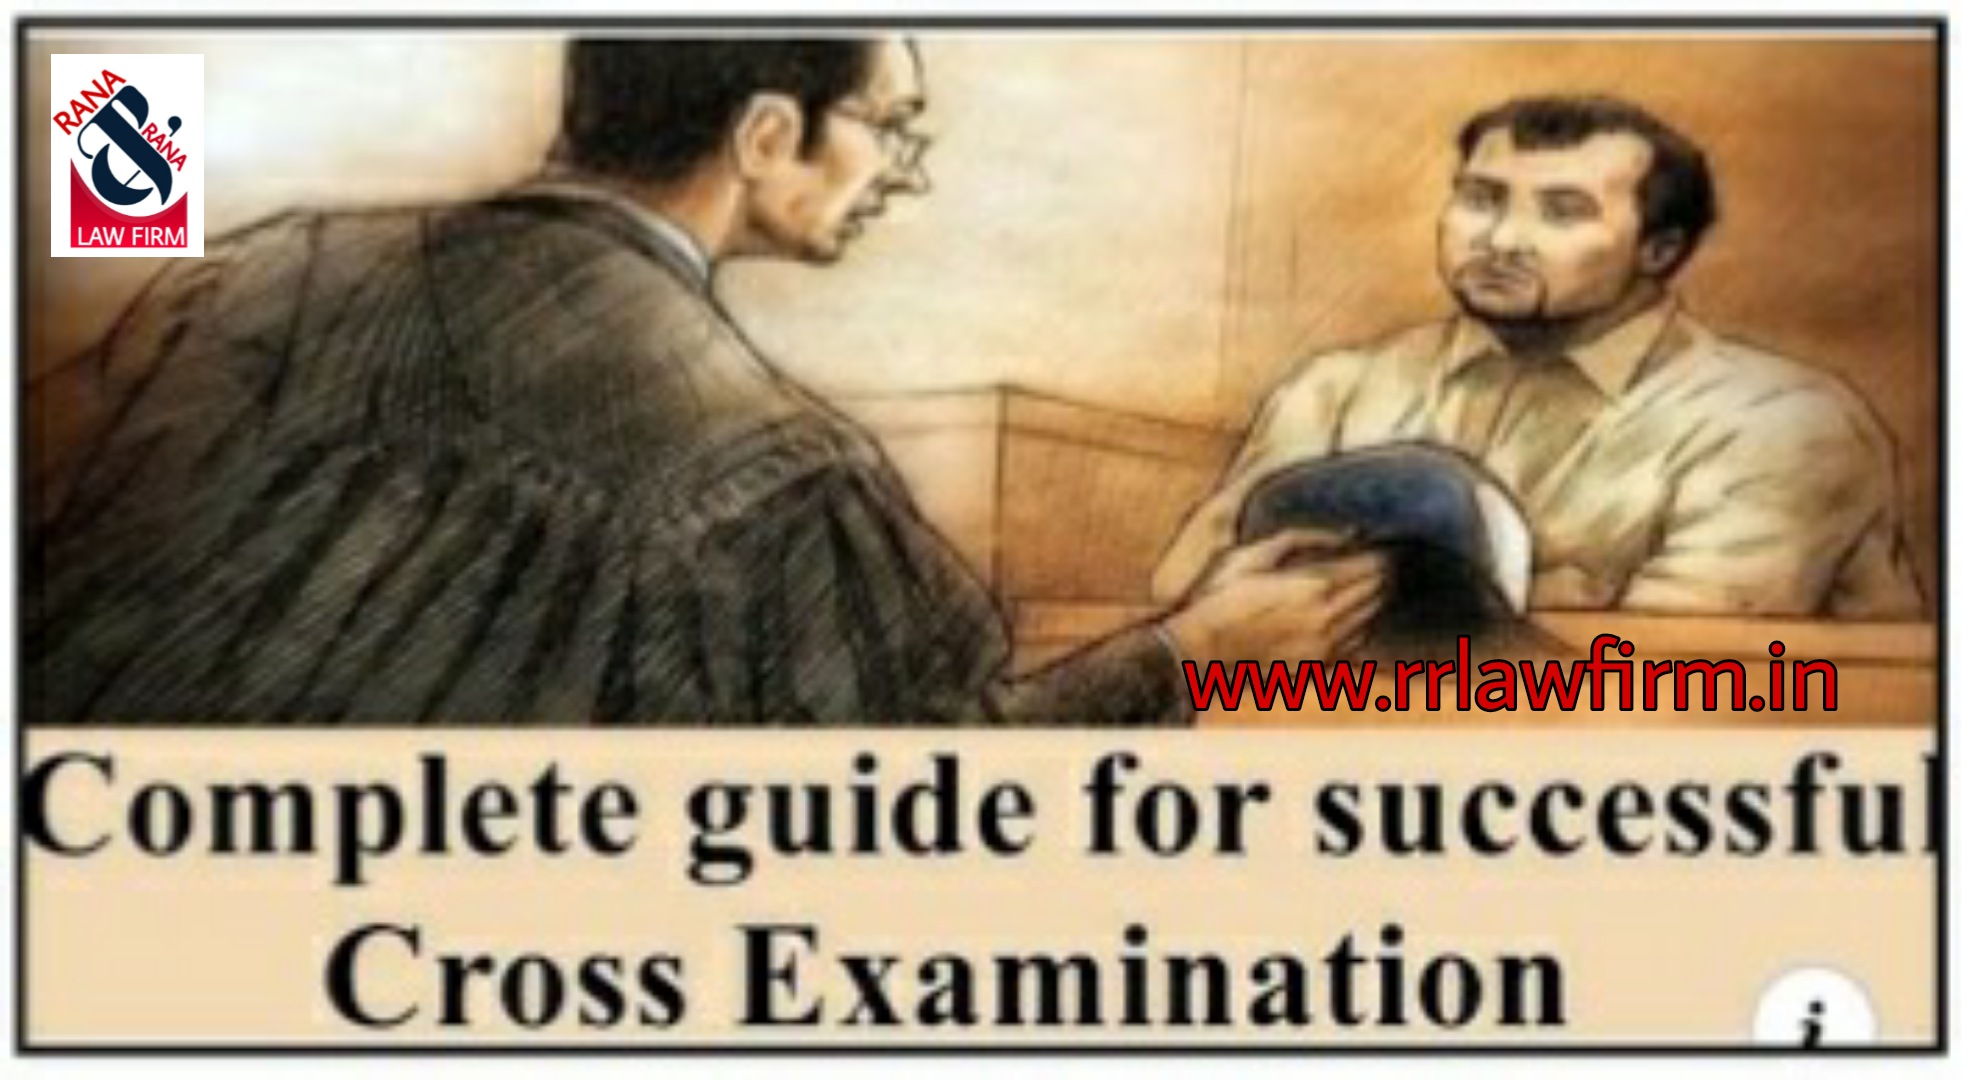 A excellent most important free guide for successful cross examination in the court.